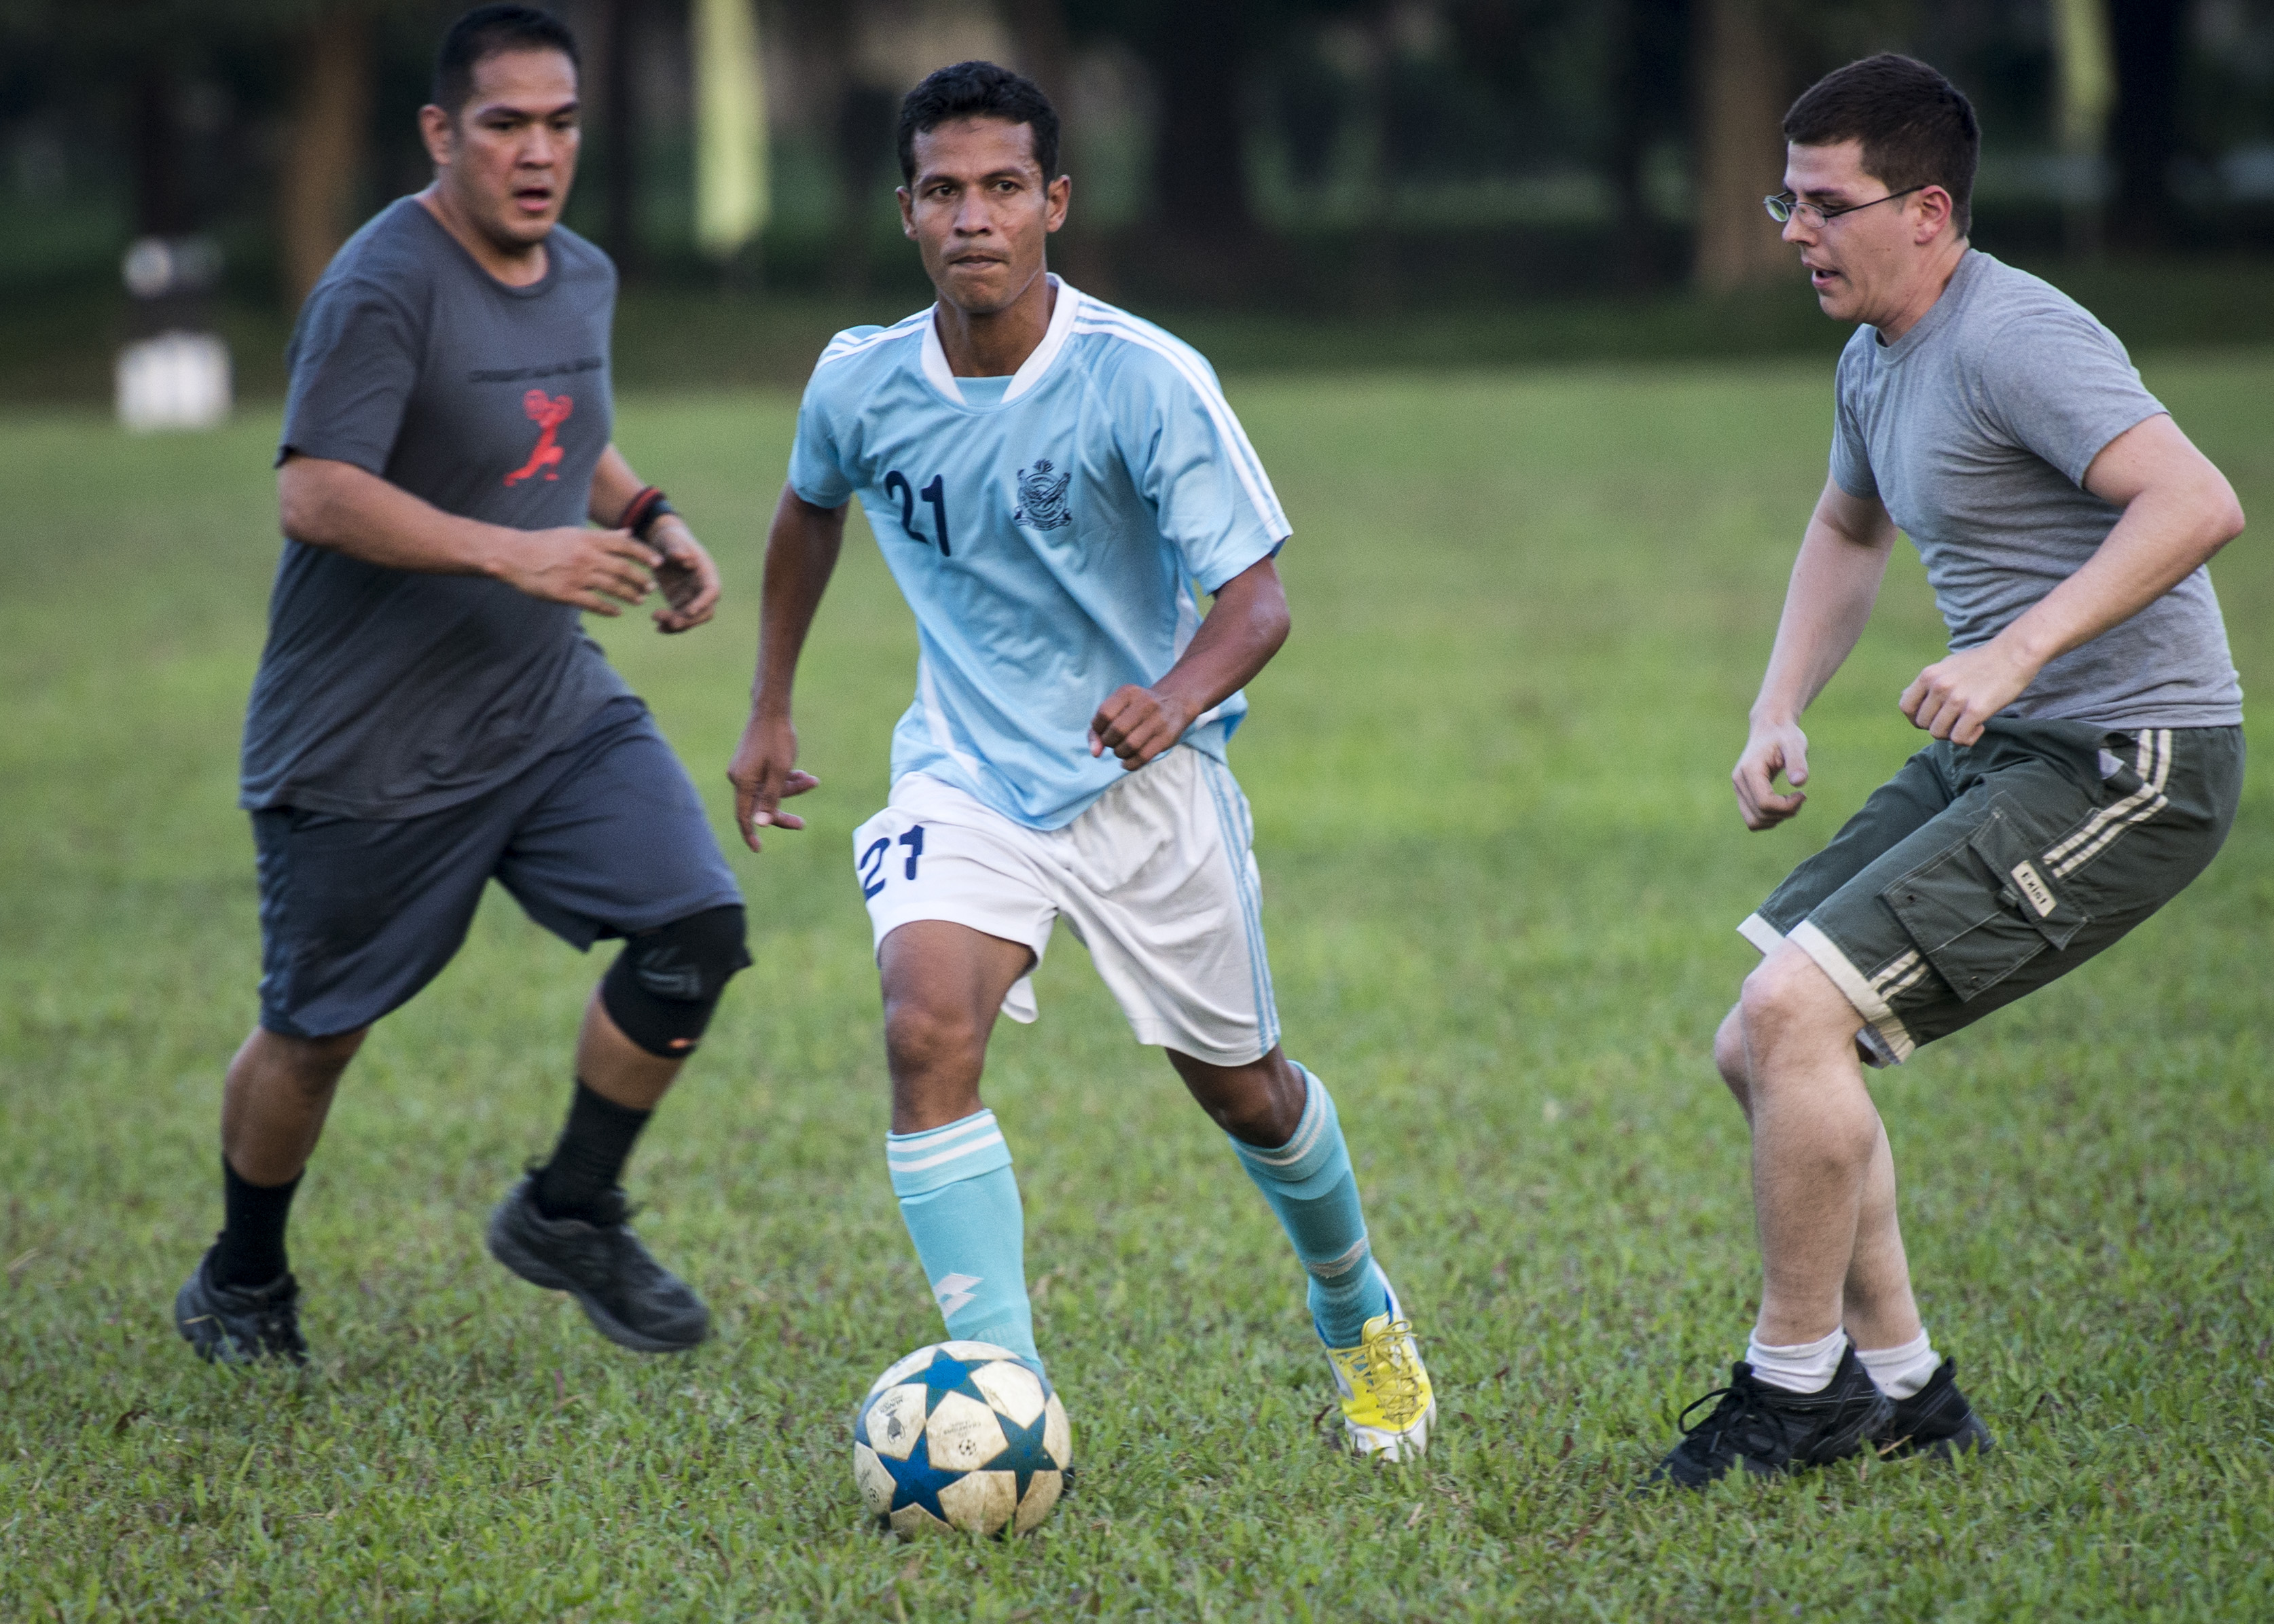 How to Boost Confidence When Playing Soccer